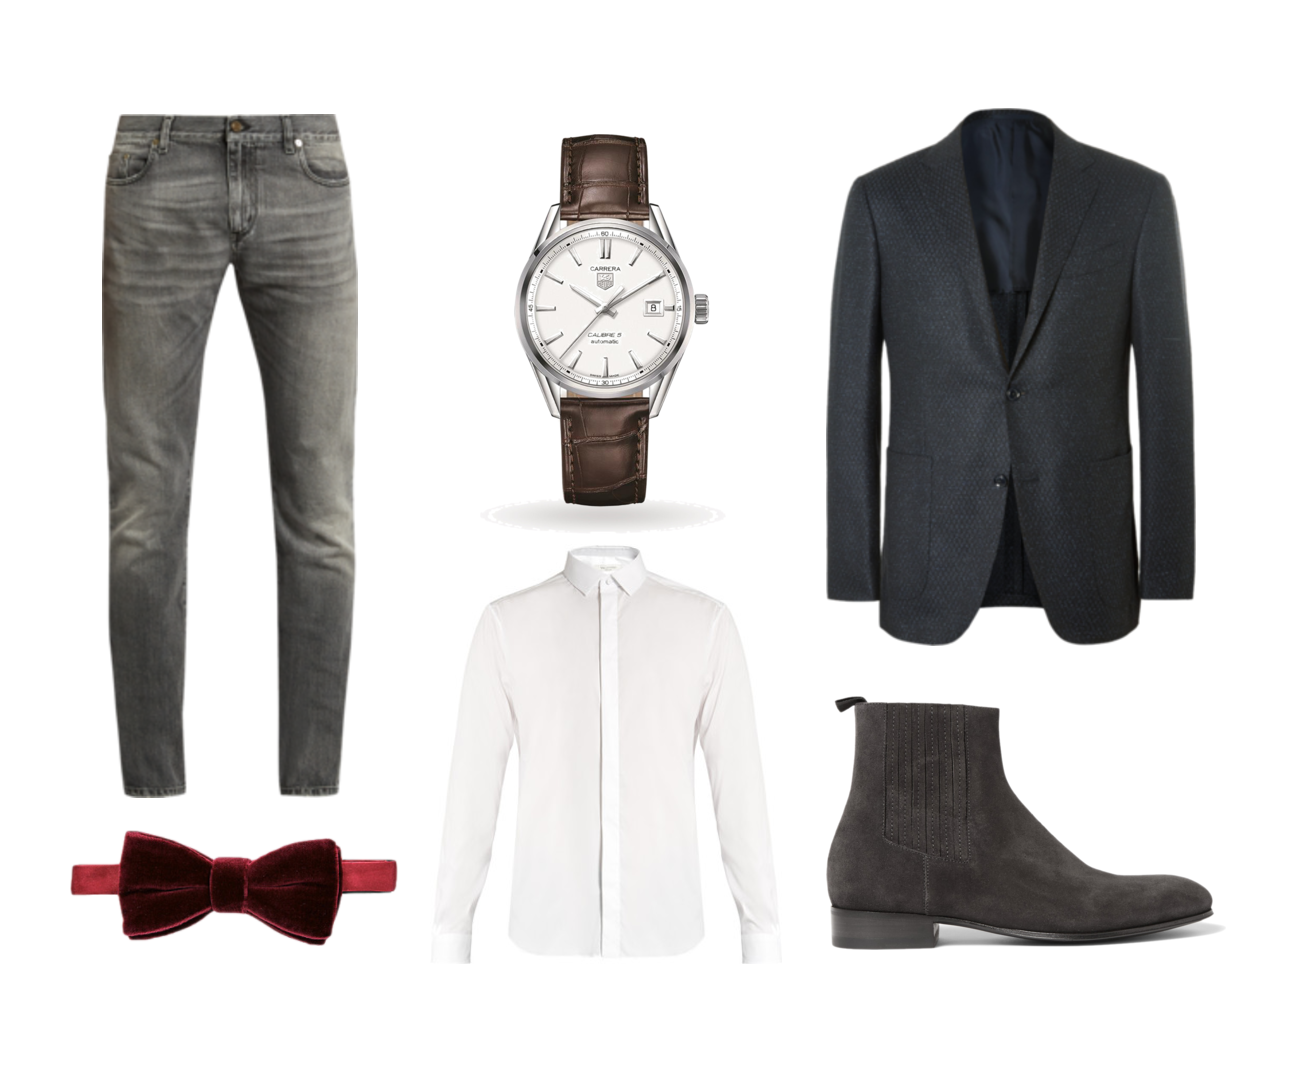 What To Wear On New Year's Eve - A Men's Outfit Guide For Going Out On NYE